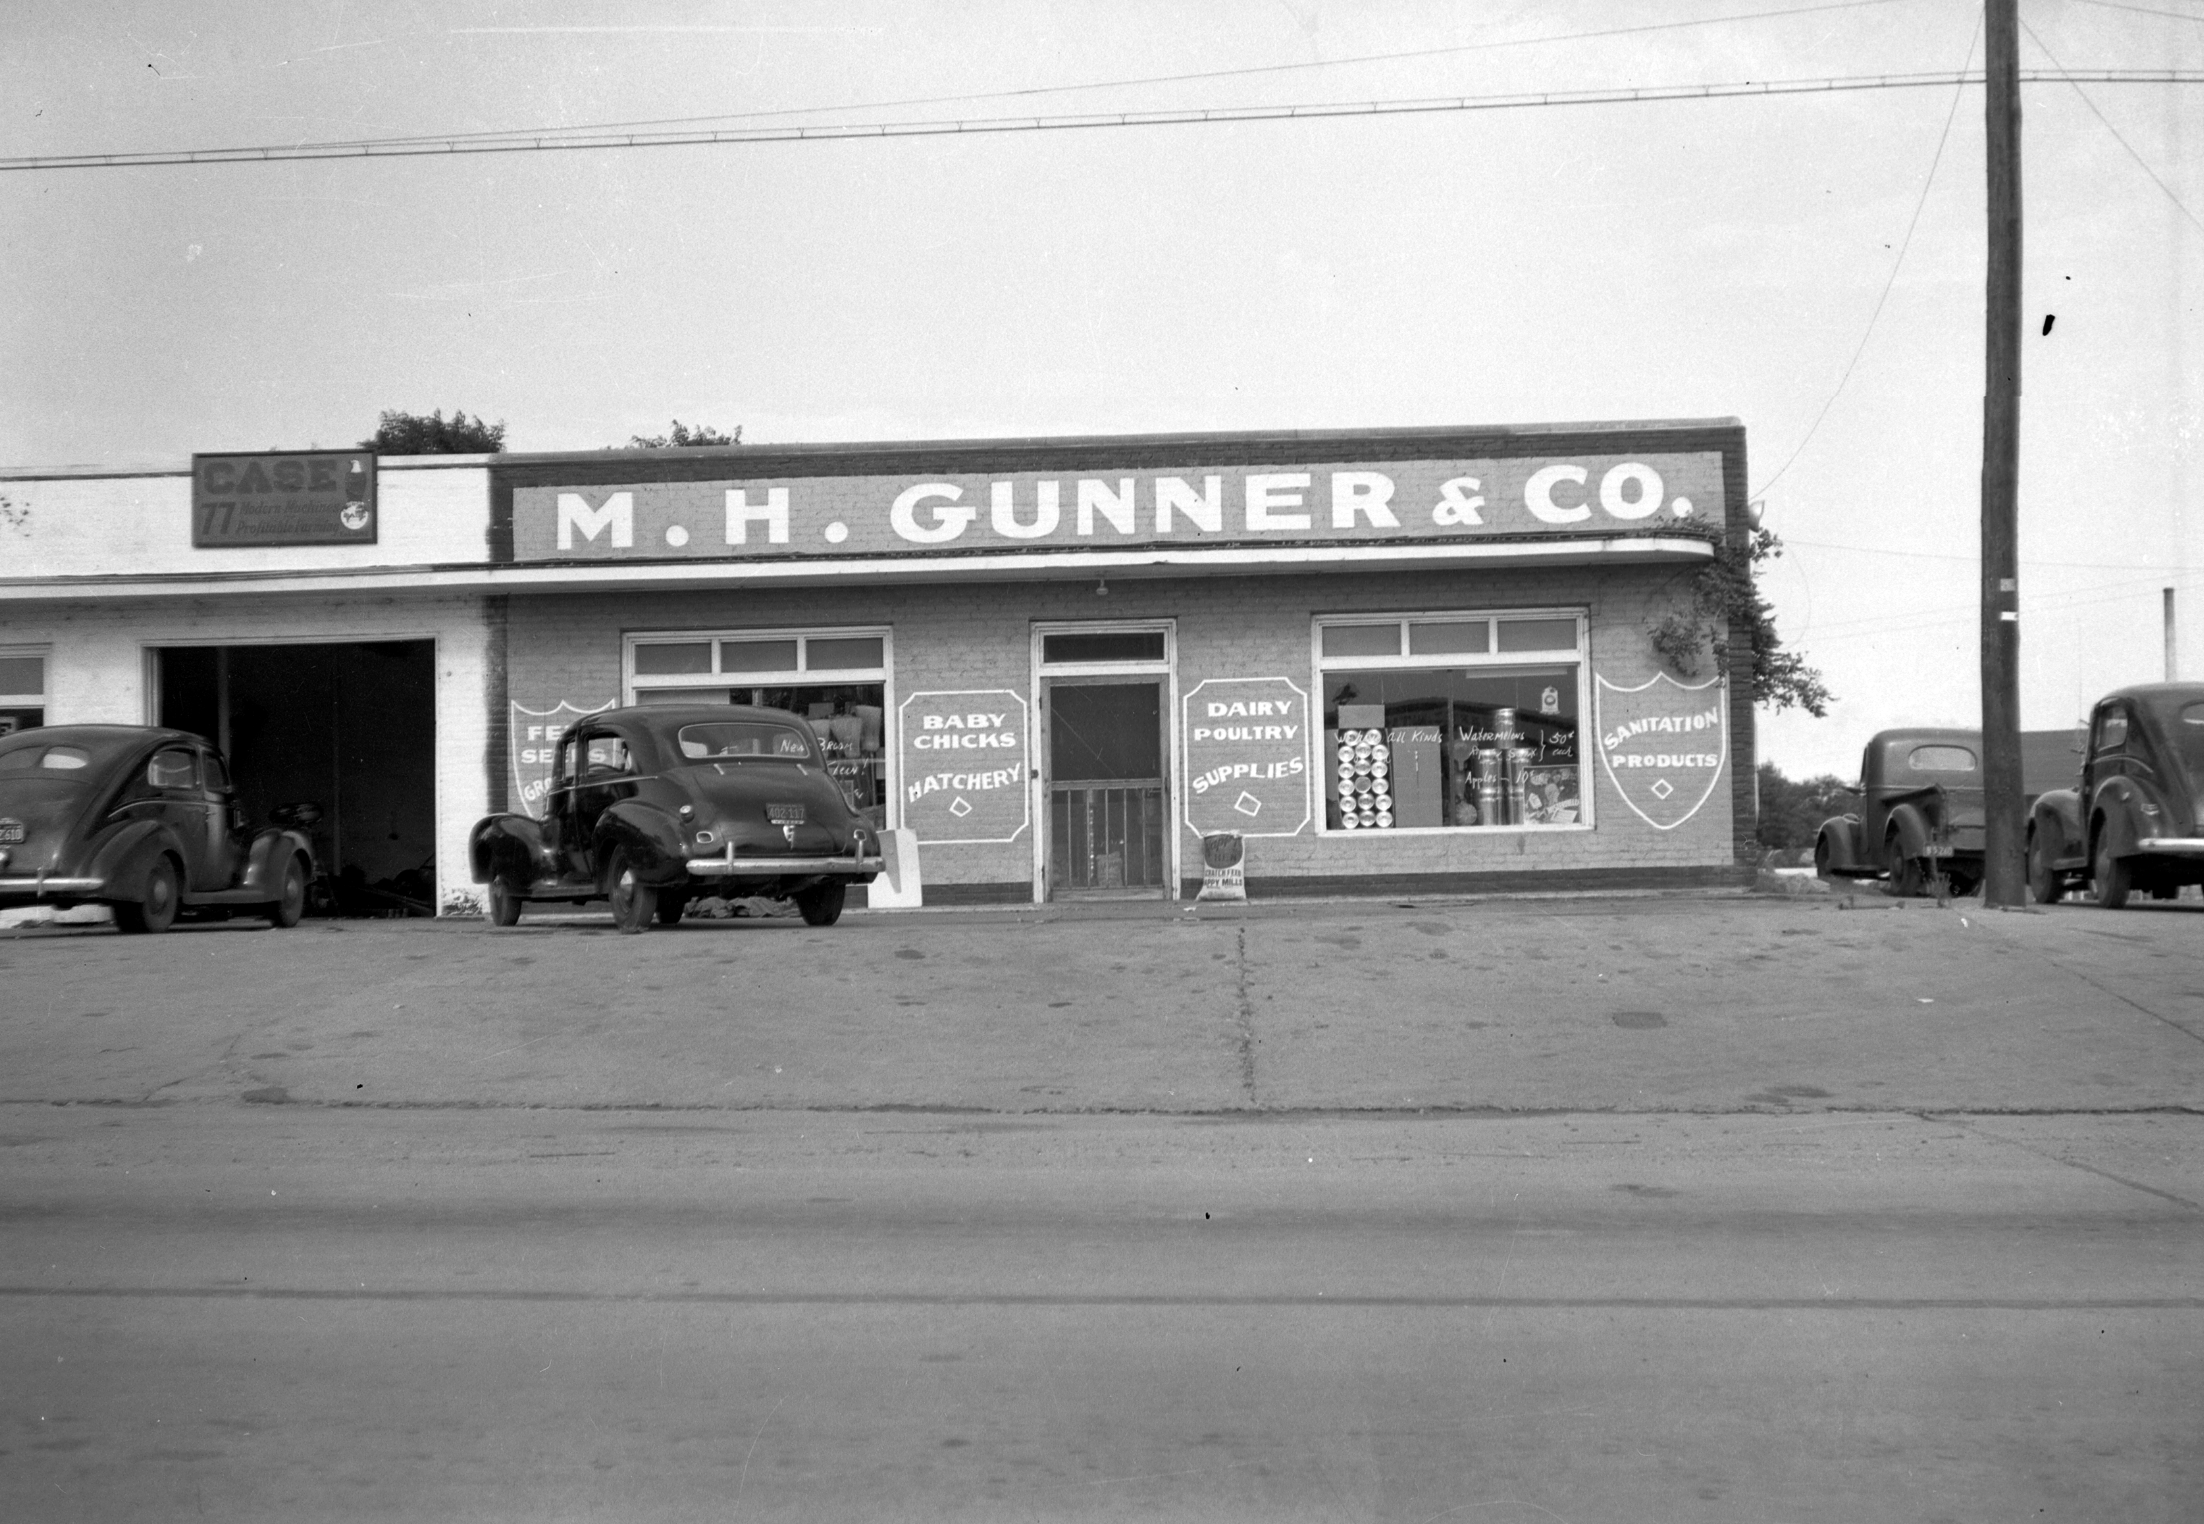 black and white street view picture of M.H. Gunner and Co. store